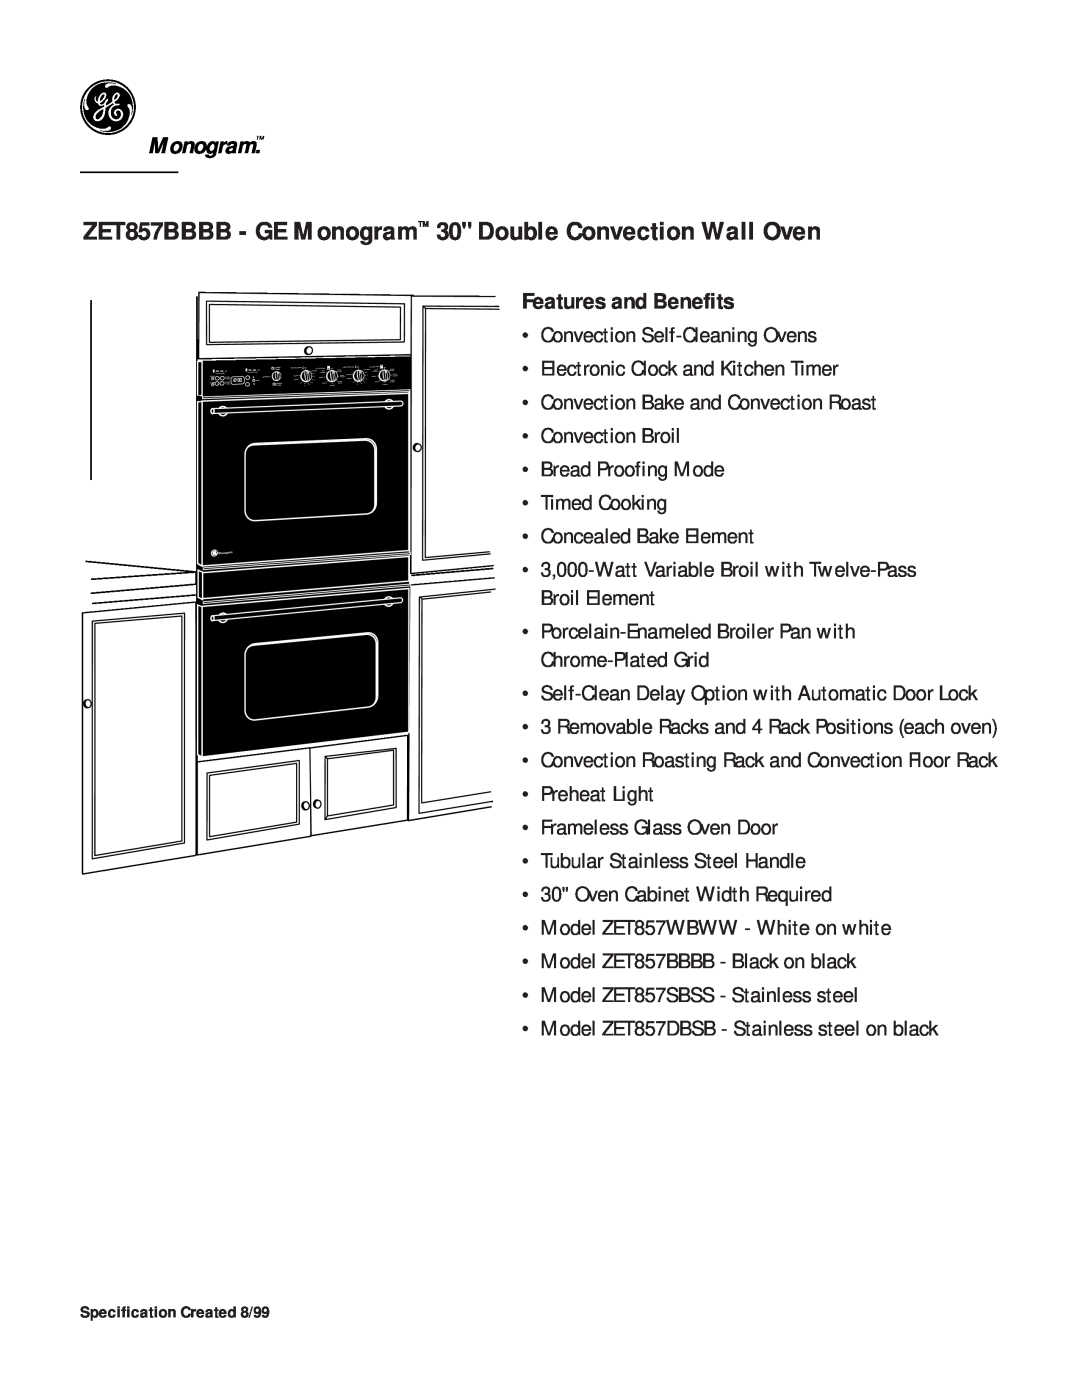 GE dimensions ZET857BBBB - GE Monogram 30 Double Convection Wall Oven, Features and Benefits 